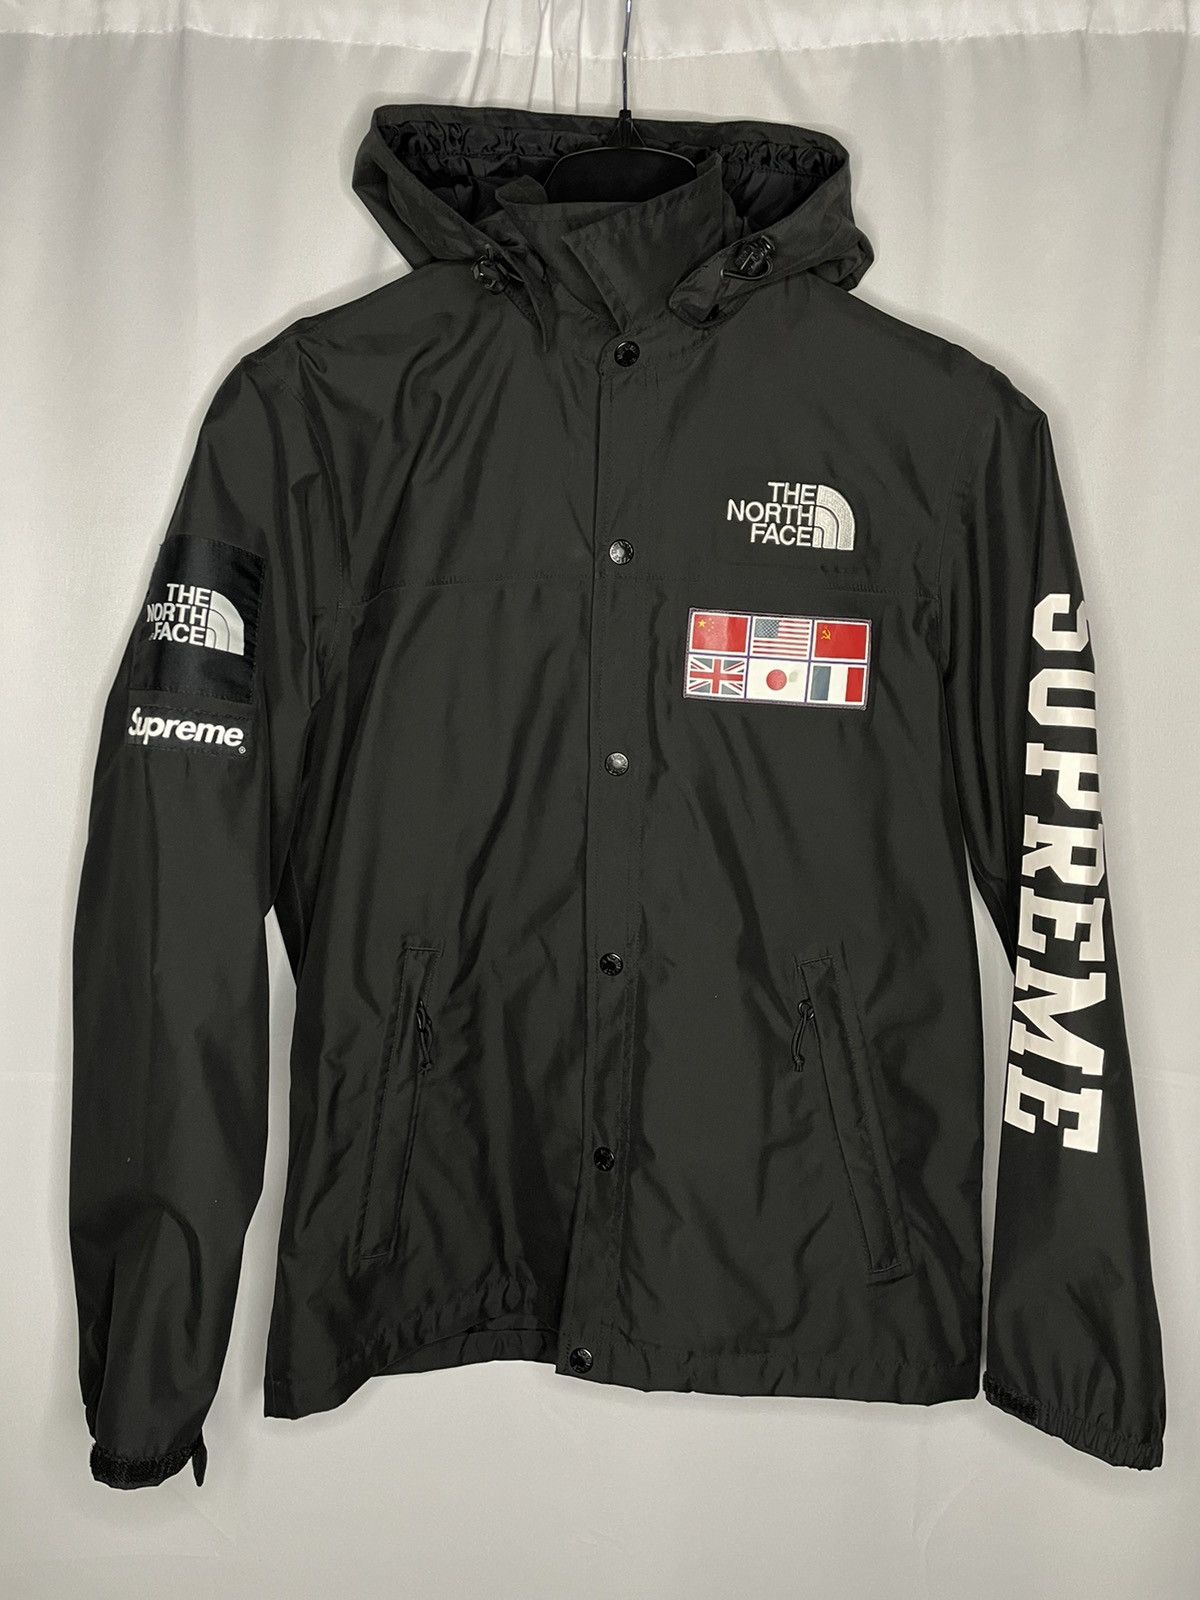 Supreme Supreme x The North Face Expedition Coaches Jacket | Grailed